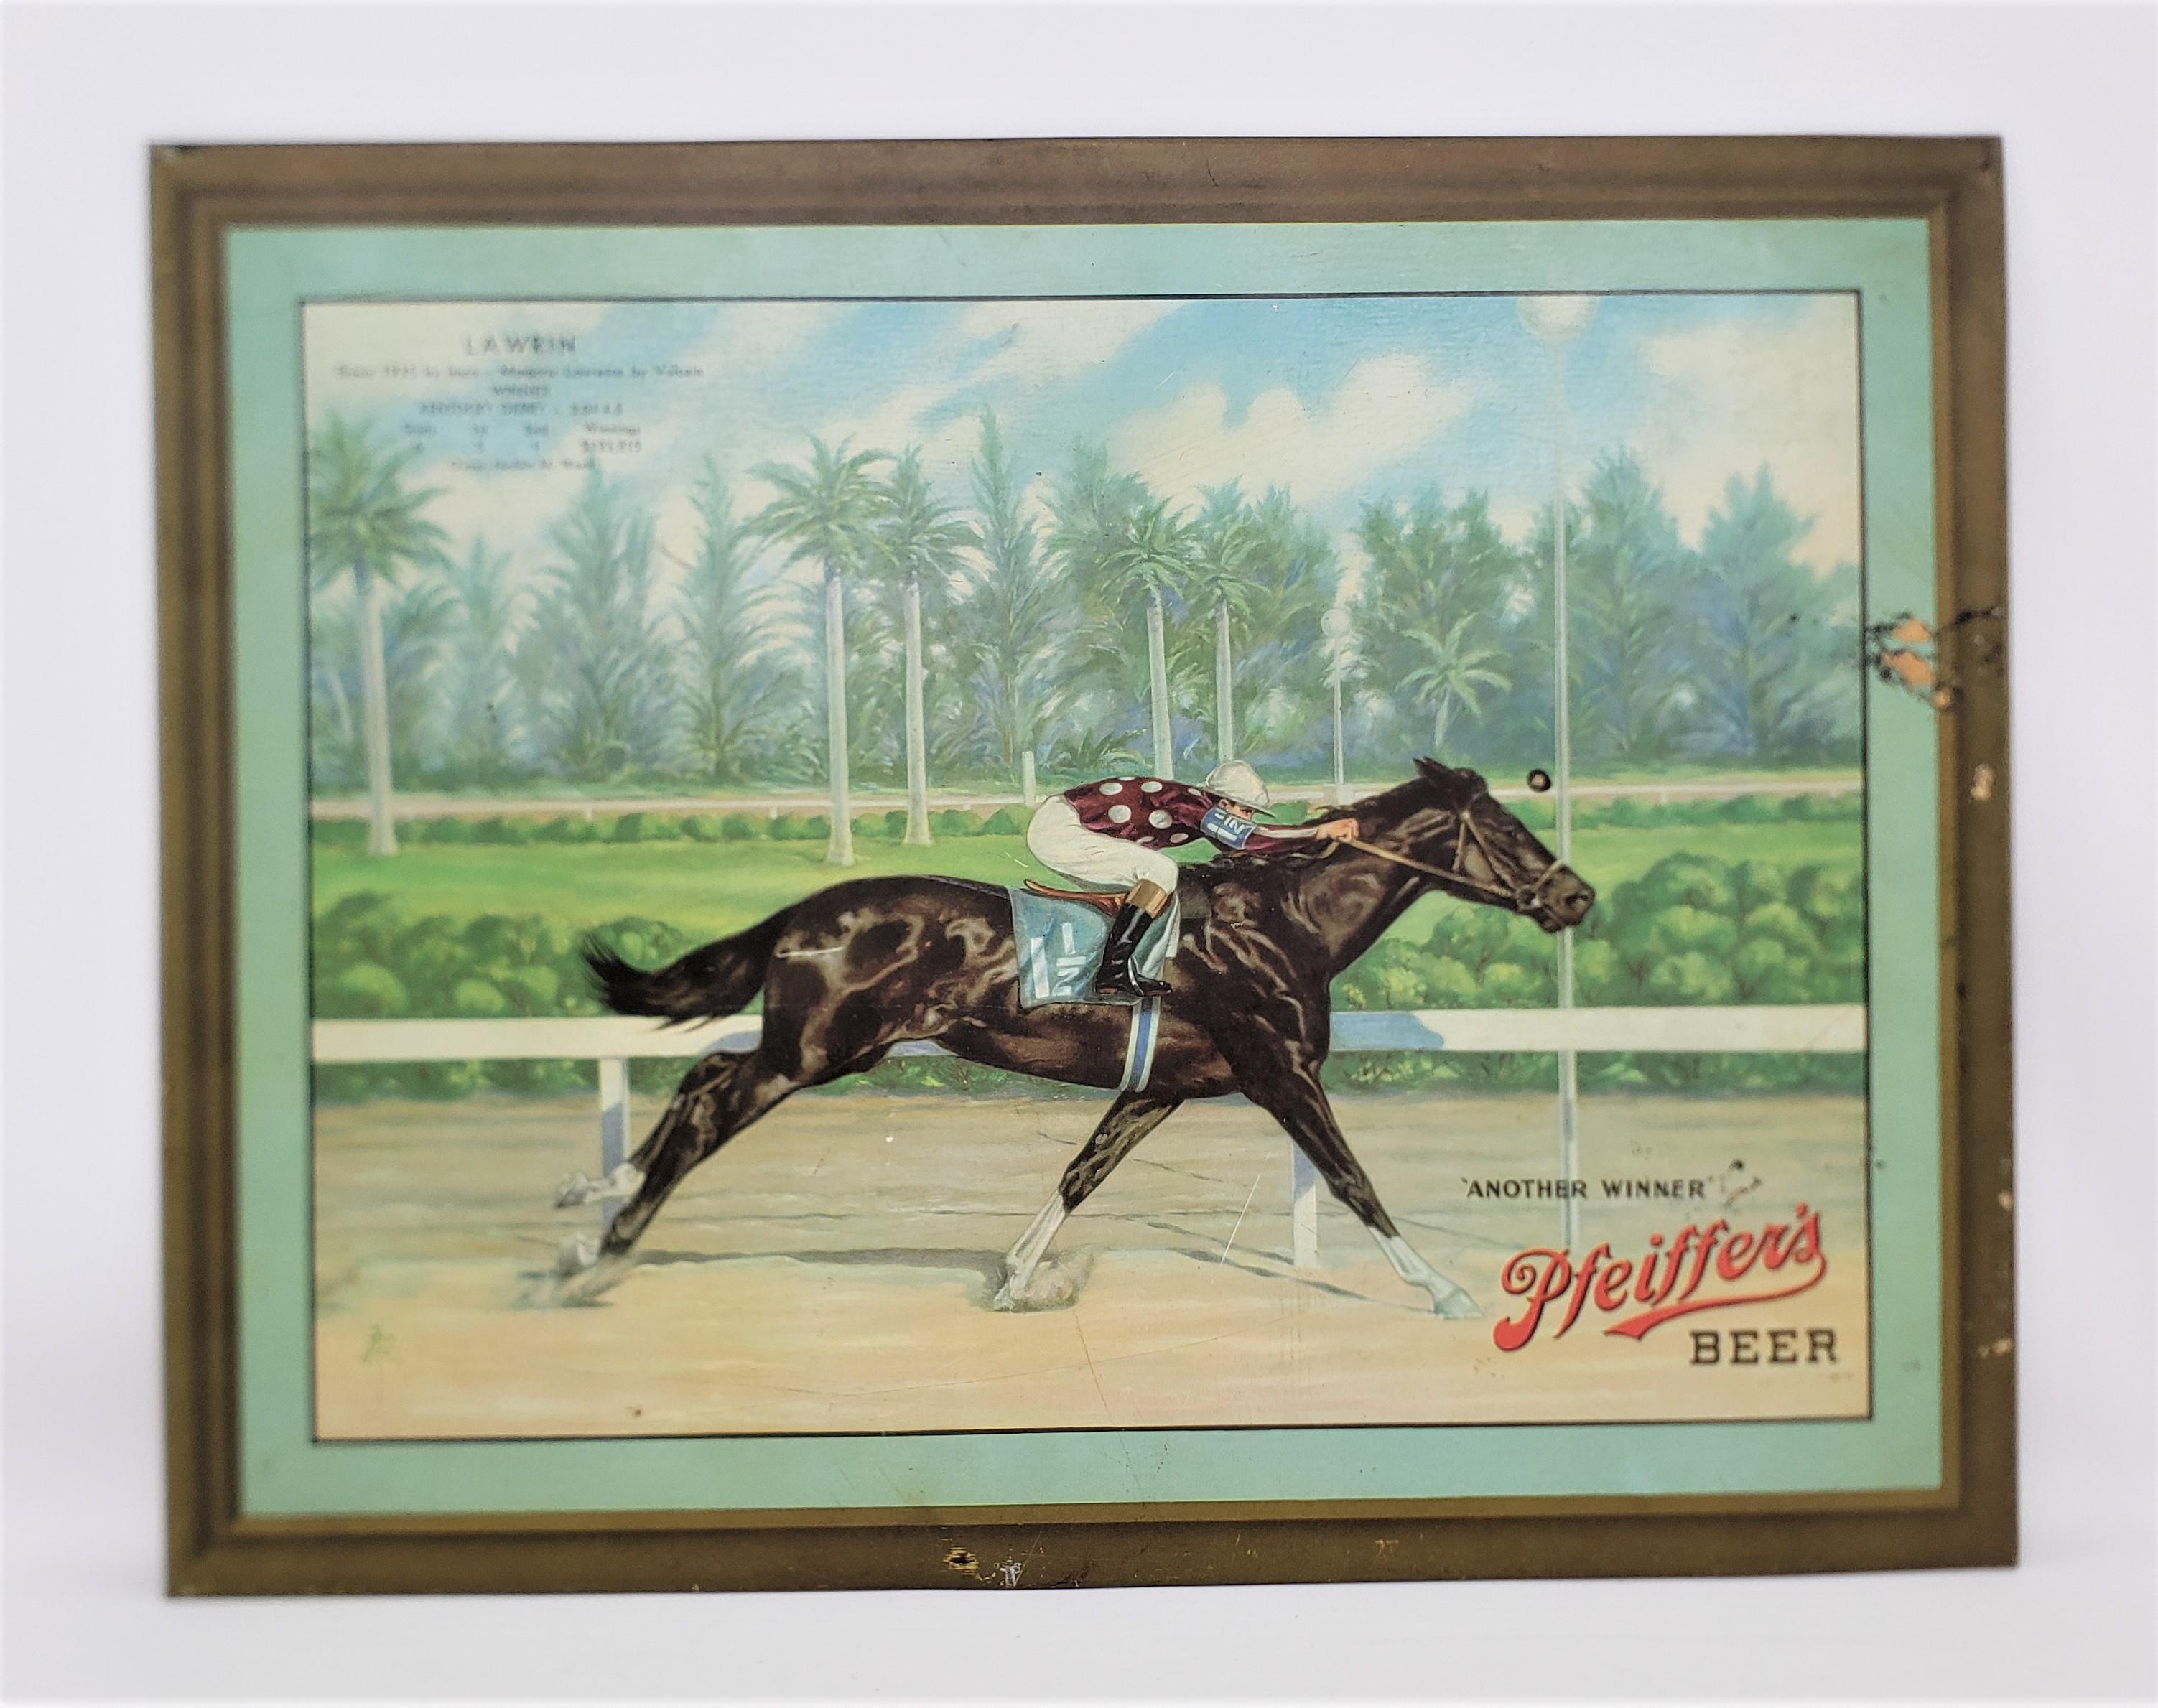 American Pair of Pfeiffer's Beer Advertising Wall Hangings with a Horse Racing Theme For Sale